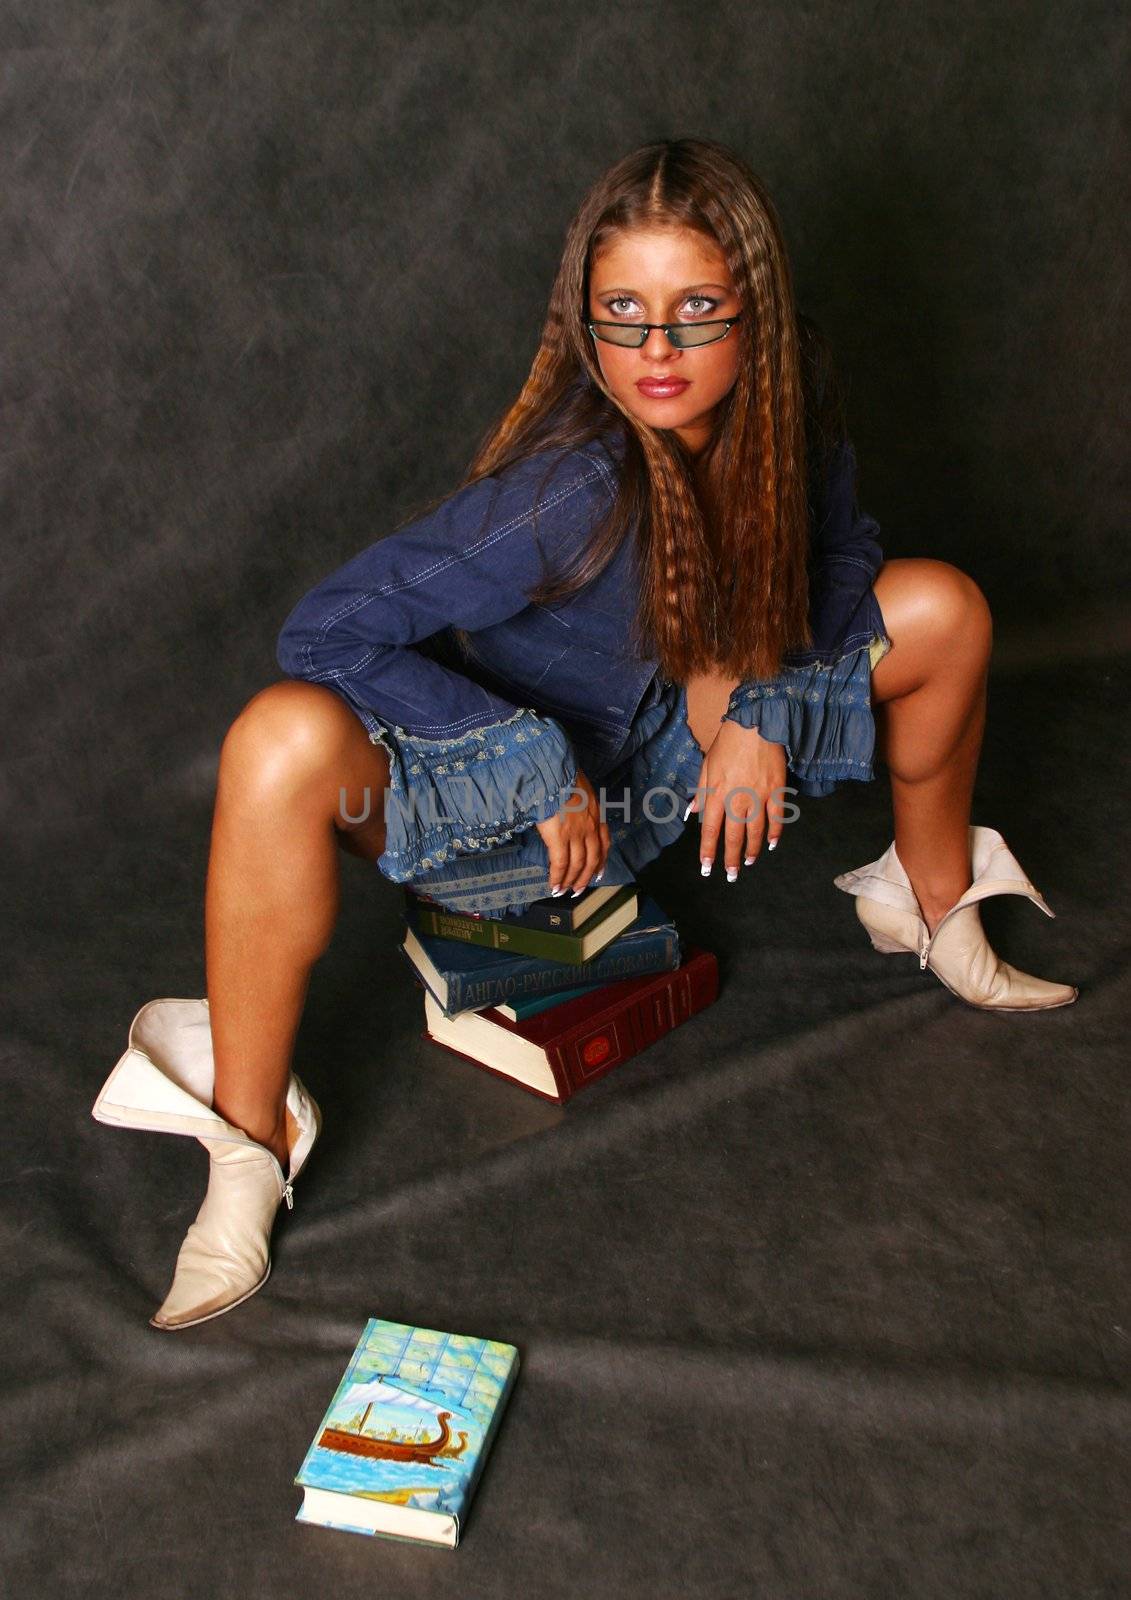 The beautiful girl in glasses sits on books